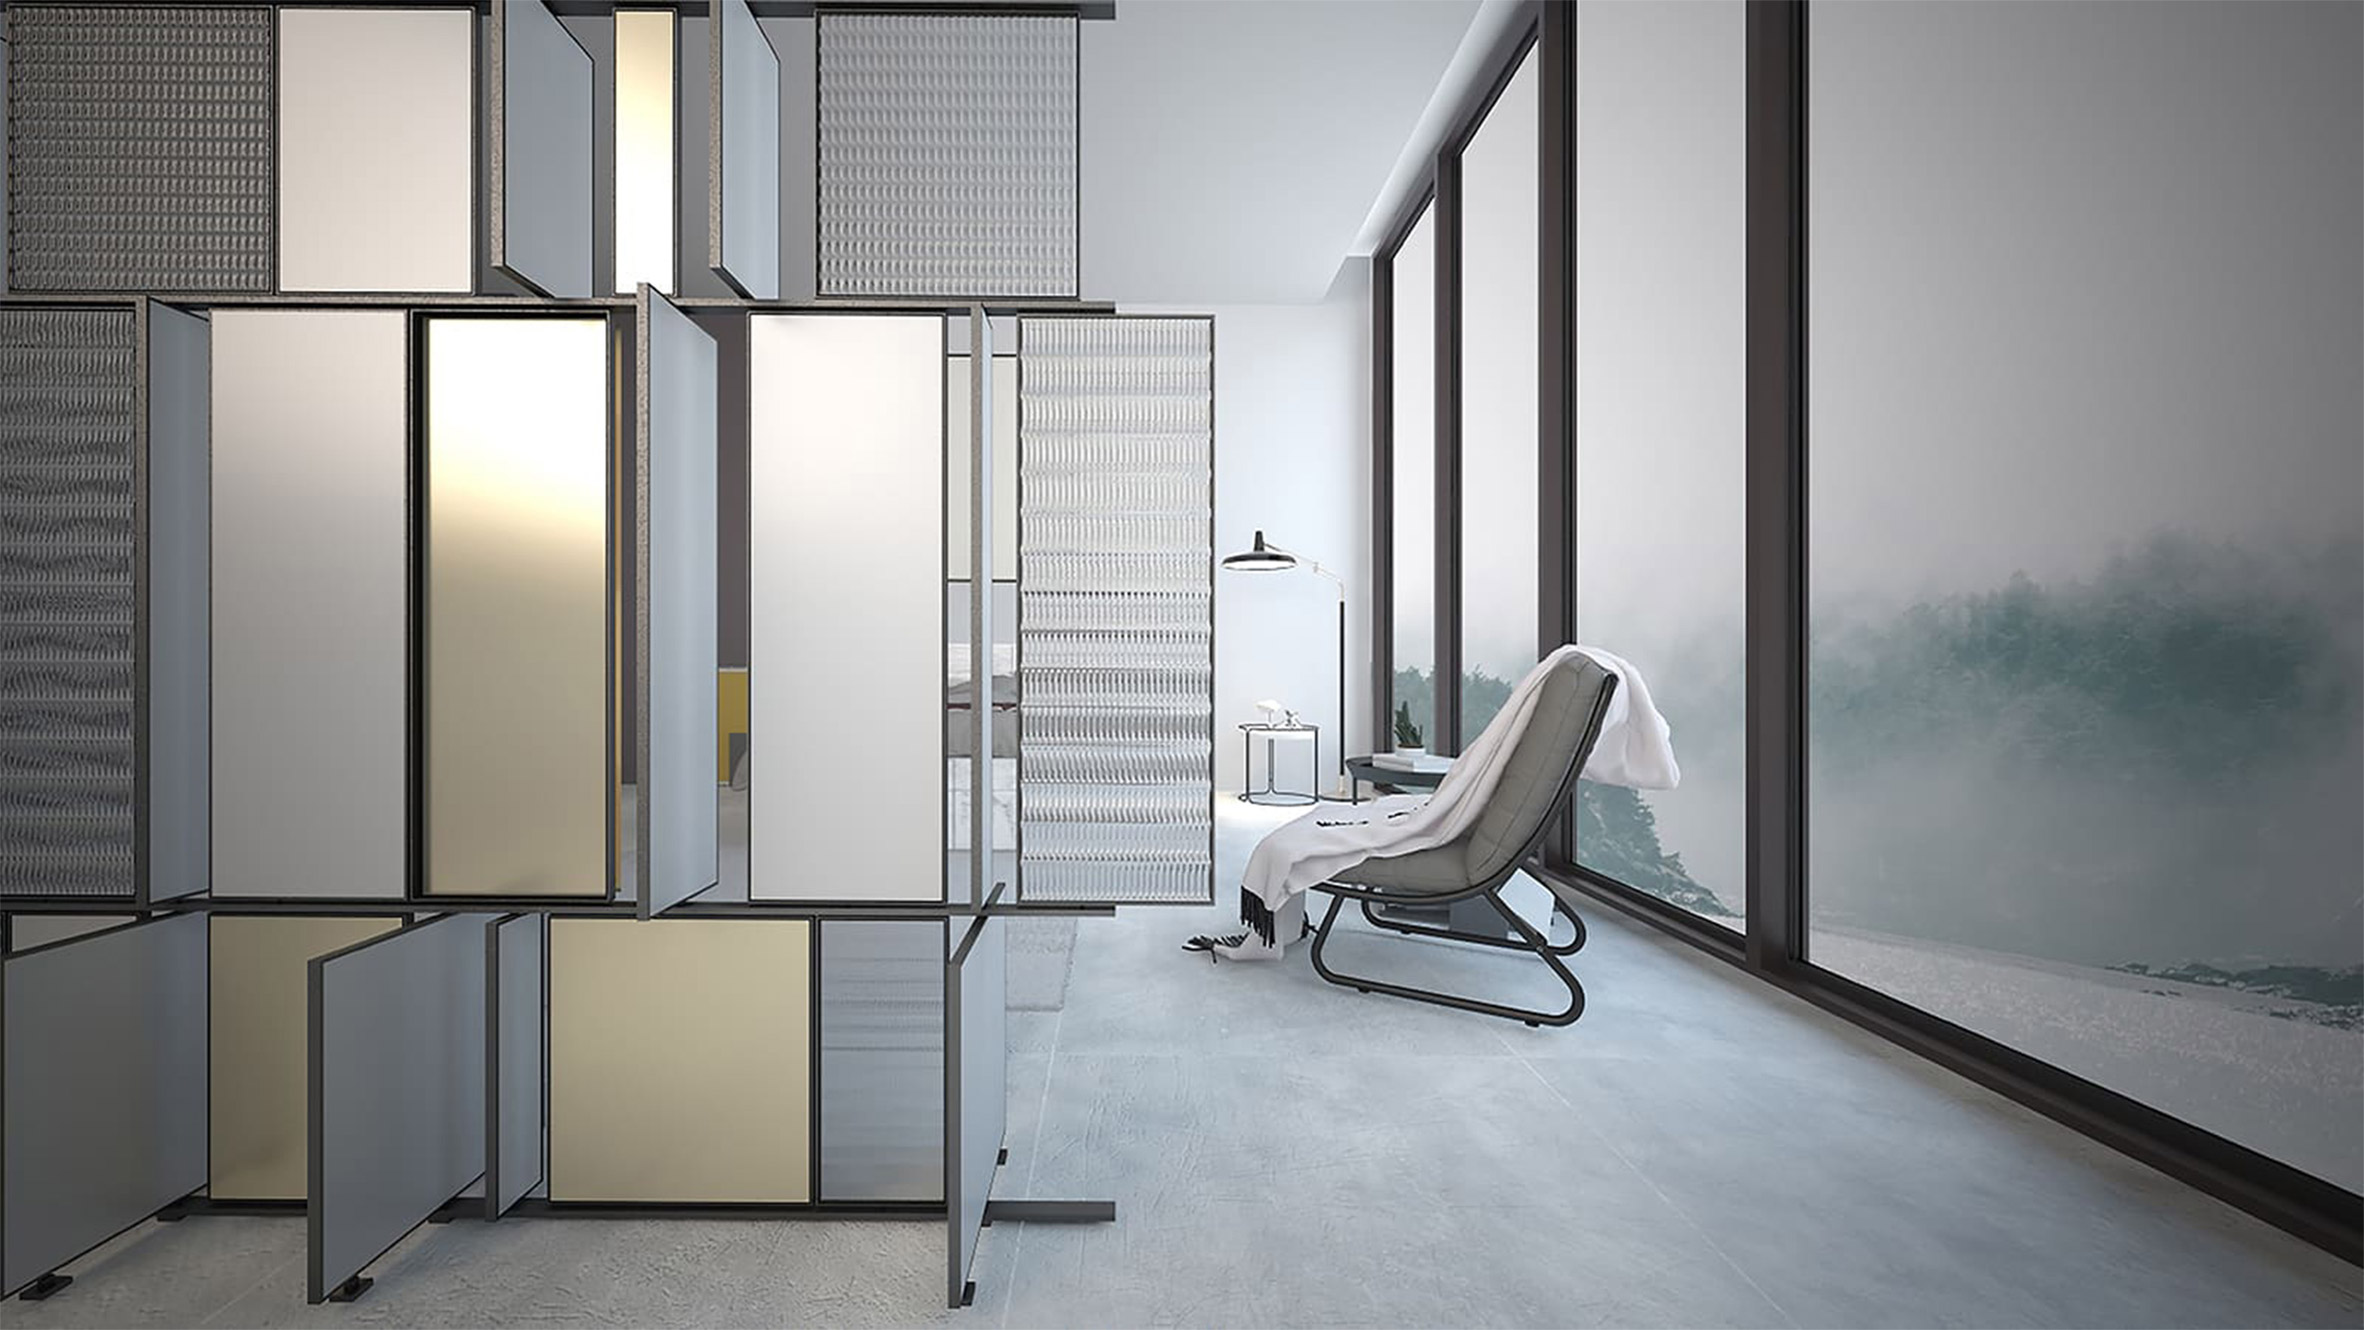 Interior of a grey living space with a lounge chair and wall separator by student at Istituto Marangoni